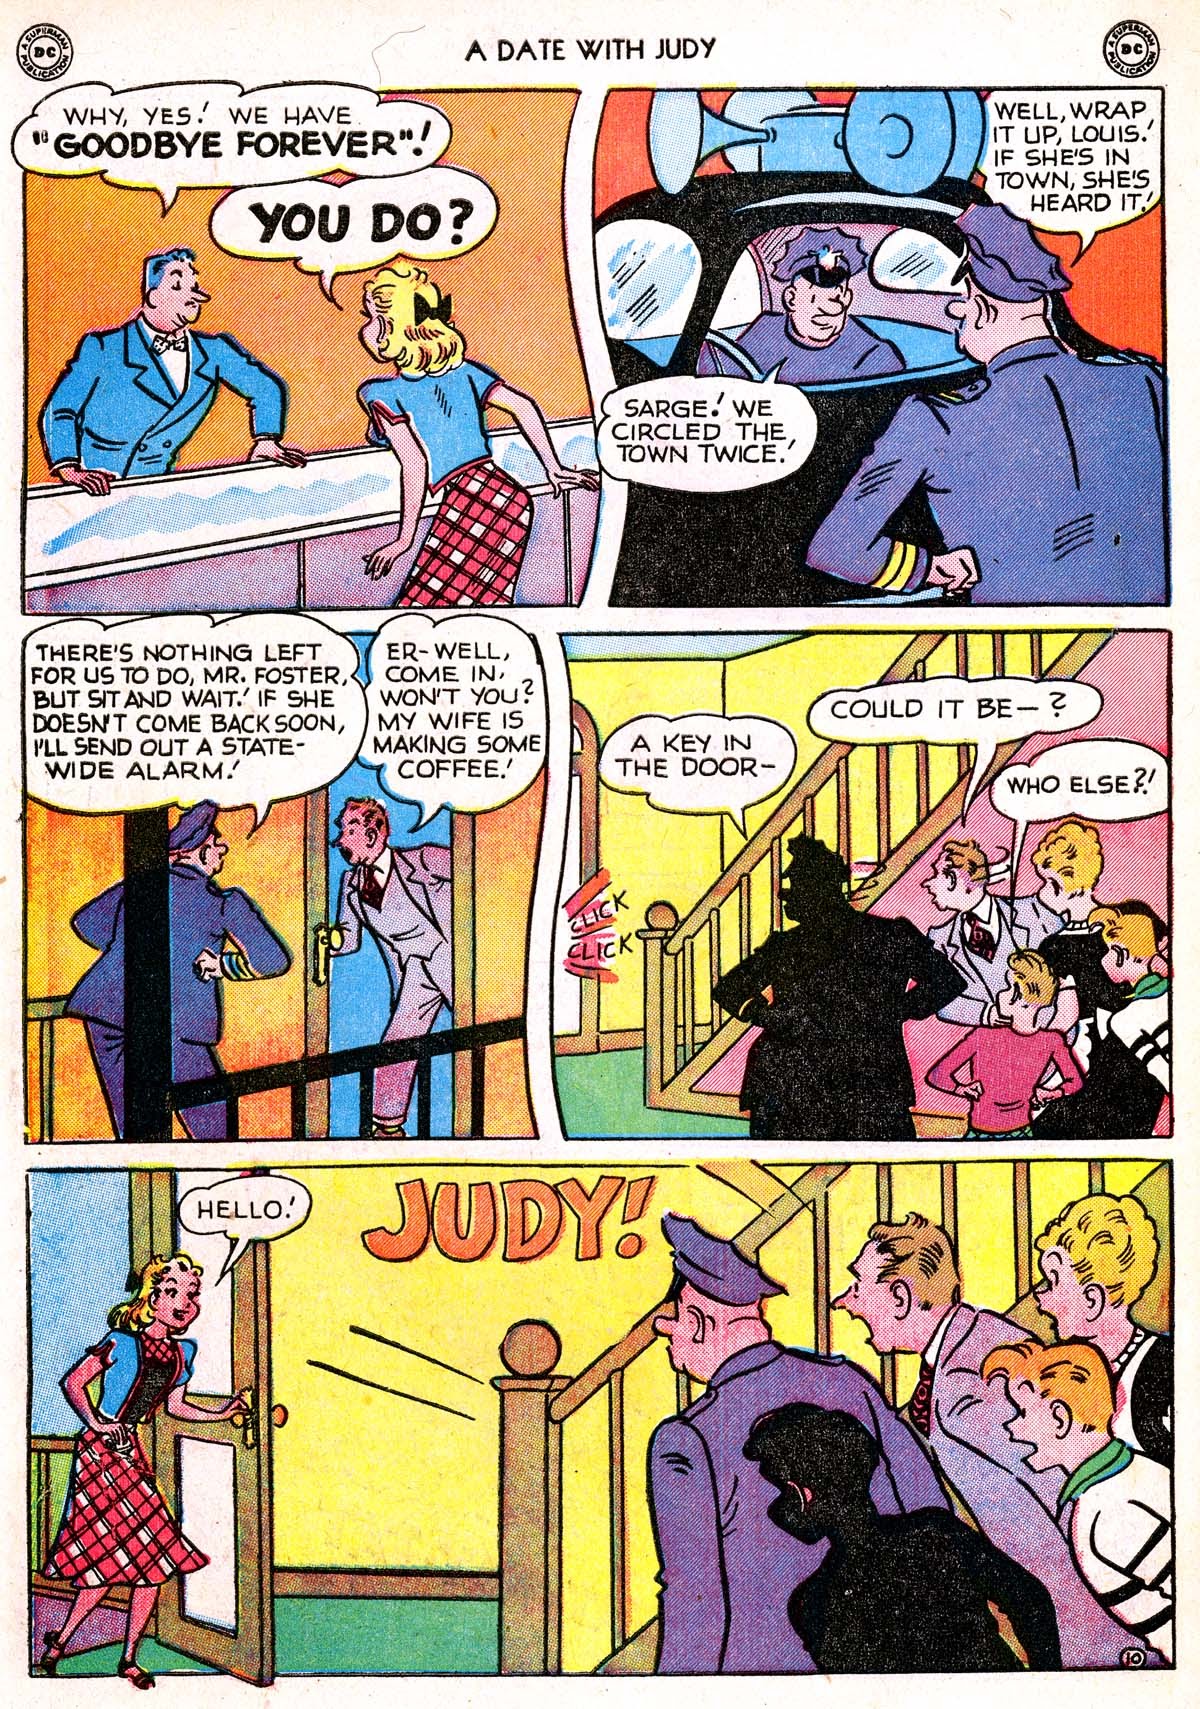 Read online A Date with Judy comic -  Issue #9 - 48